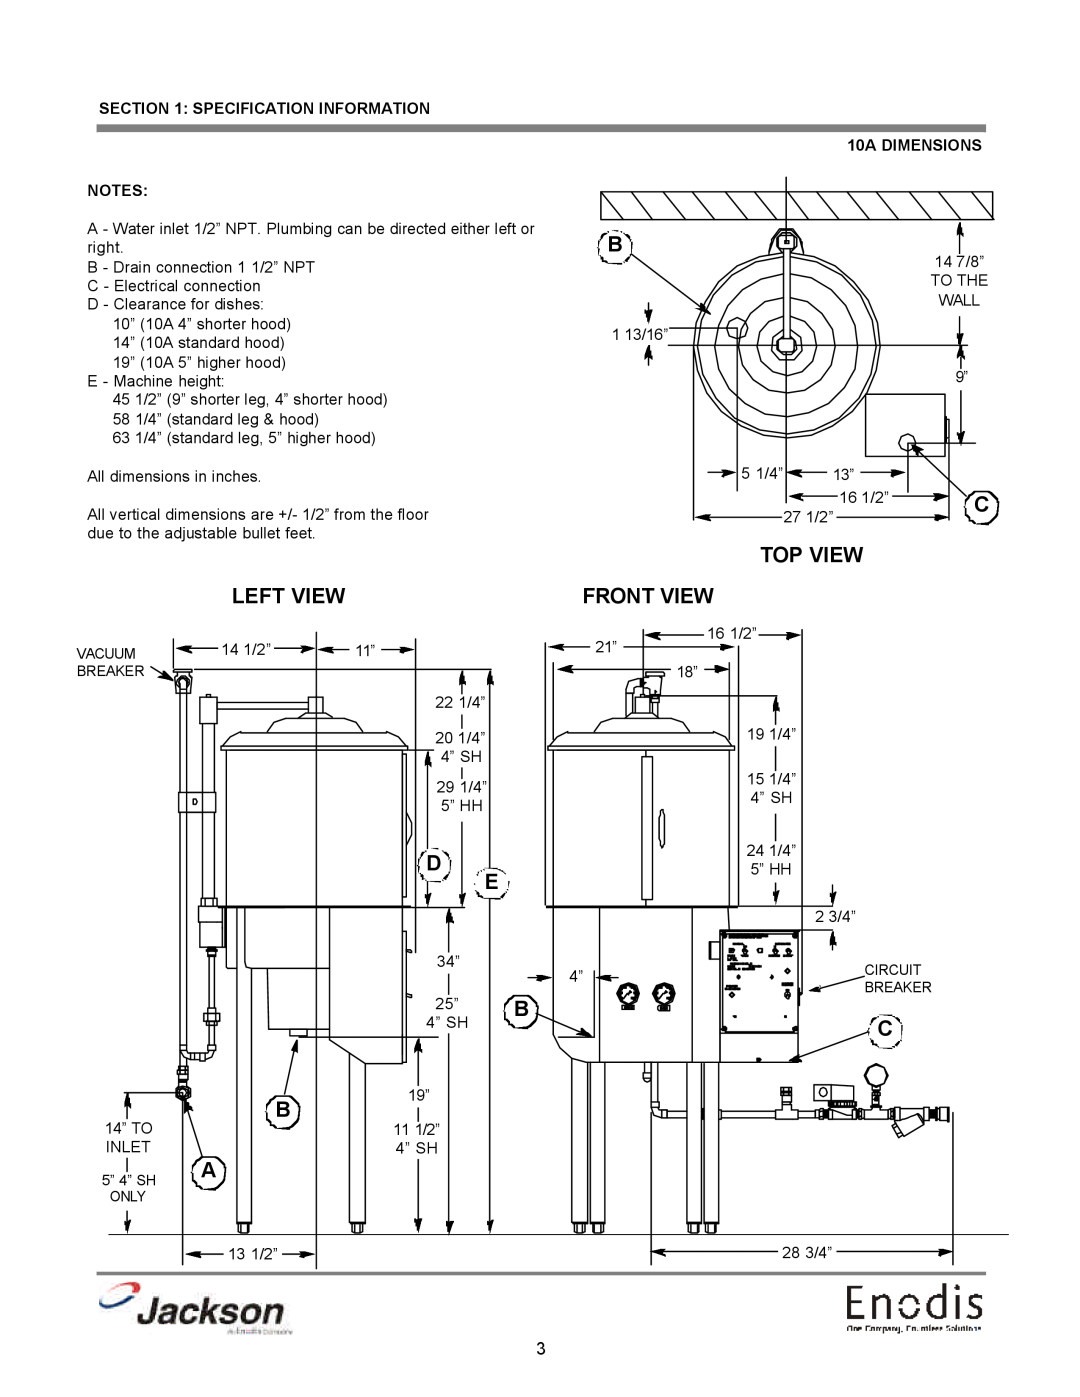 Jackson 10APRB, 10AB, 10U operation manual Top View, Left View, Front View, SPECIFICATION INFORMATION 10A DIMENSIONS 